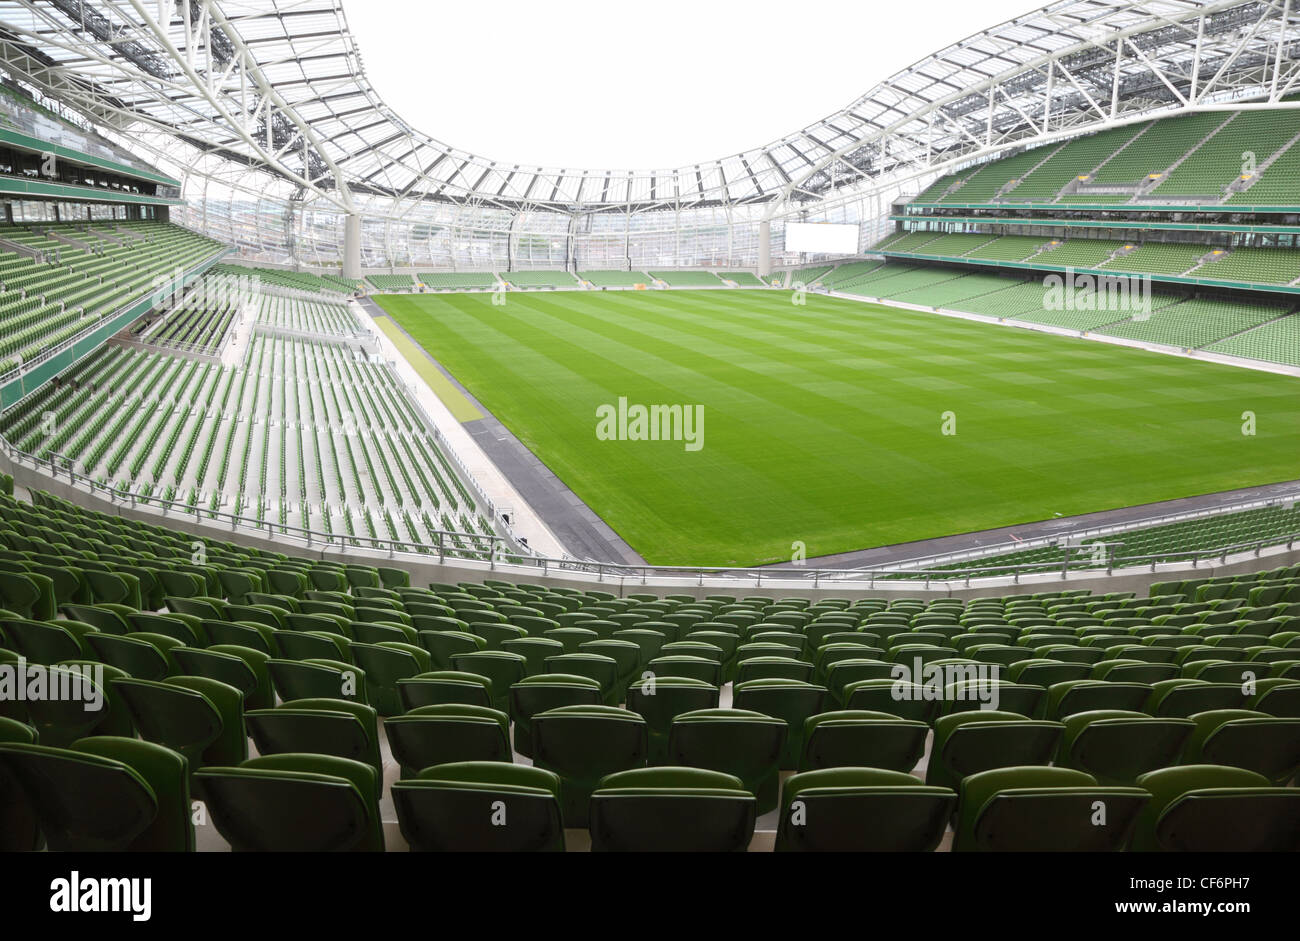 Rows of green seats in an empty stadium. Focus on front seats Stock Photo